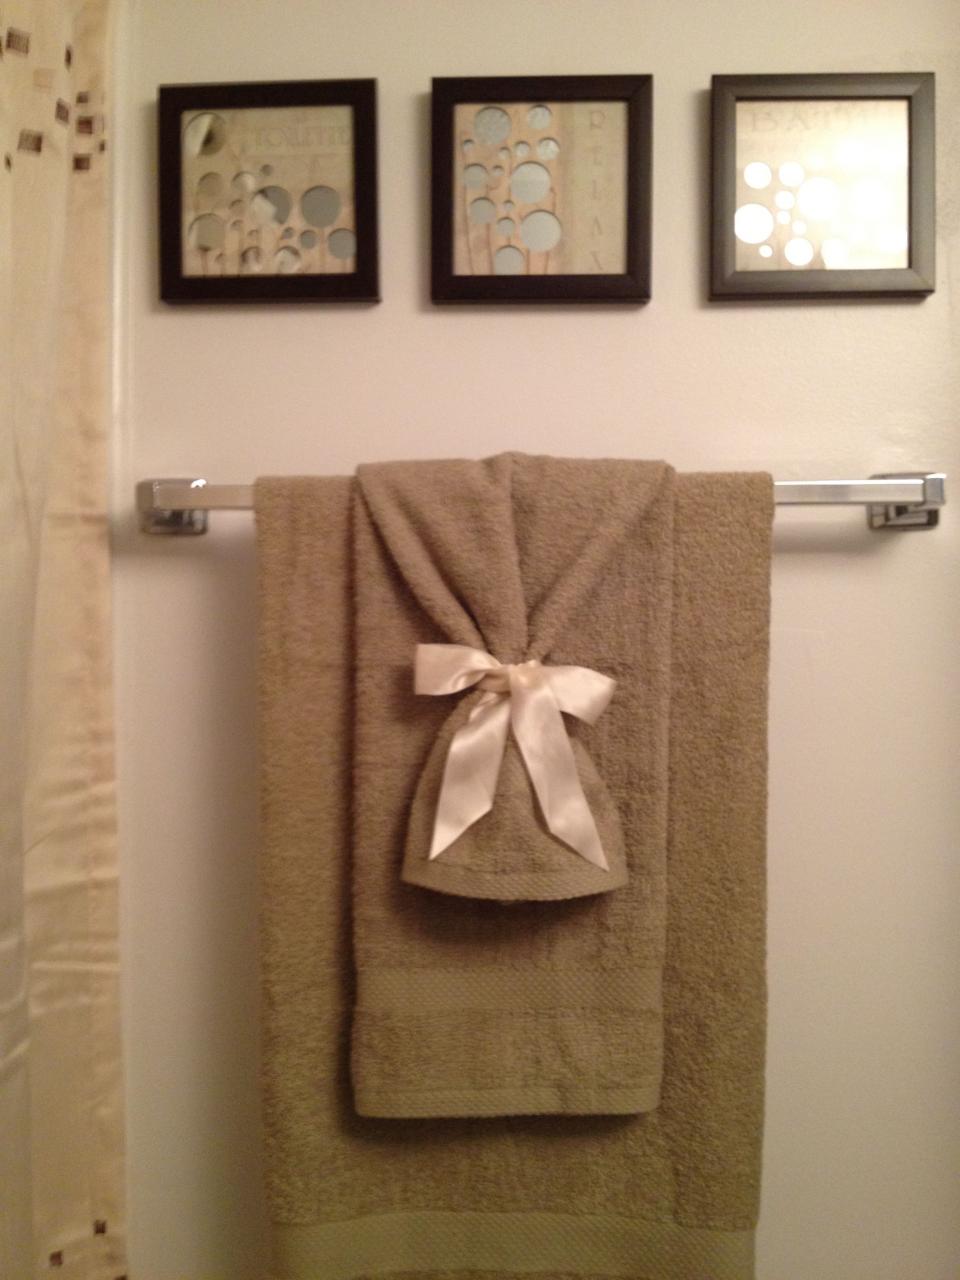 Use ribbon tied around towels ) Bathroom towel decor, Hang towels in